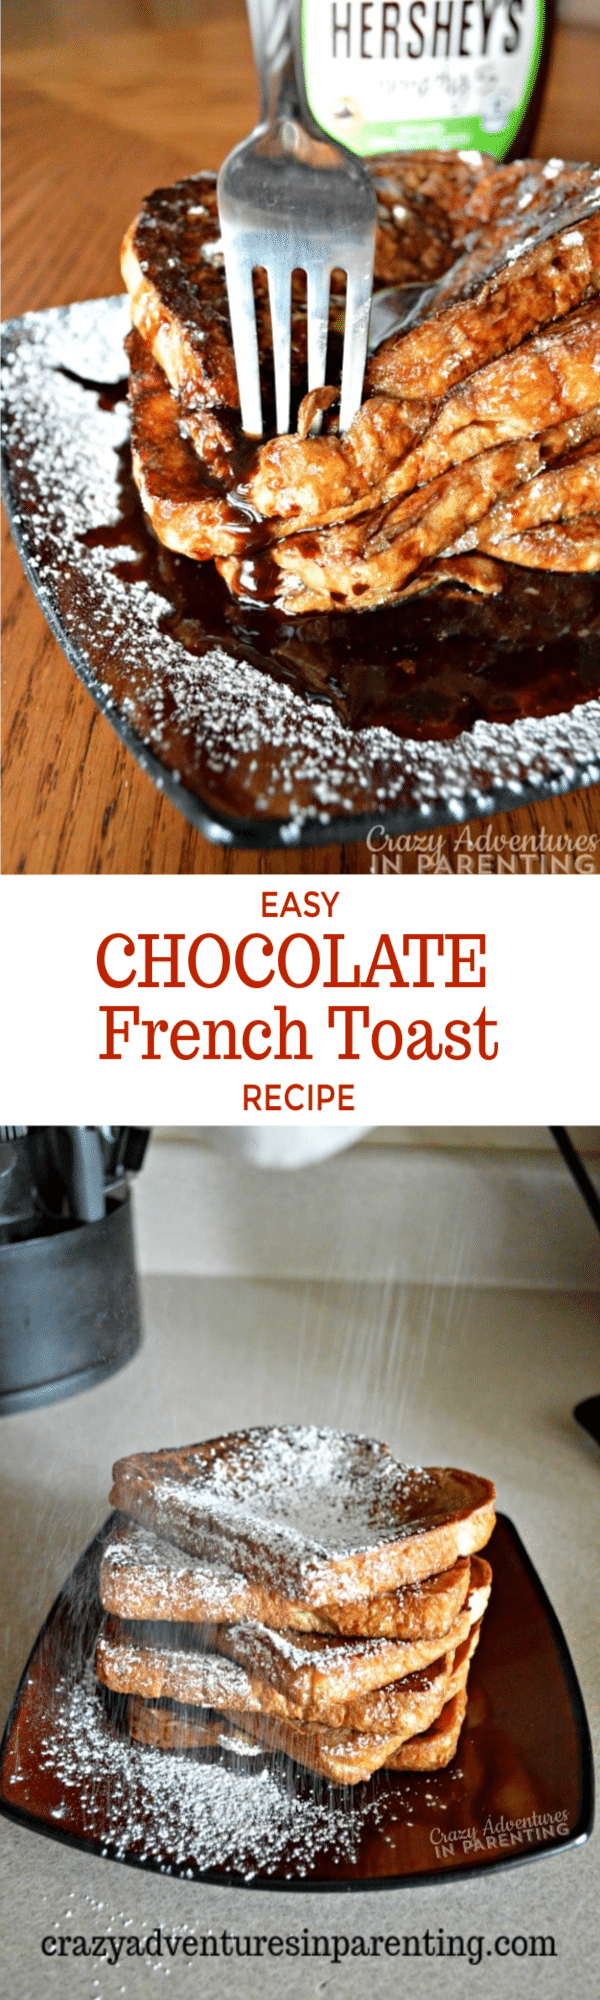 Easy Chocolate French Toast Recipe